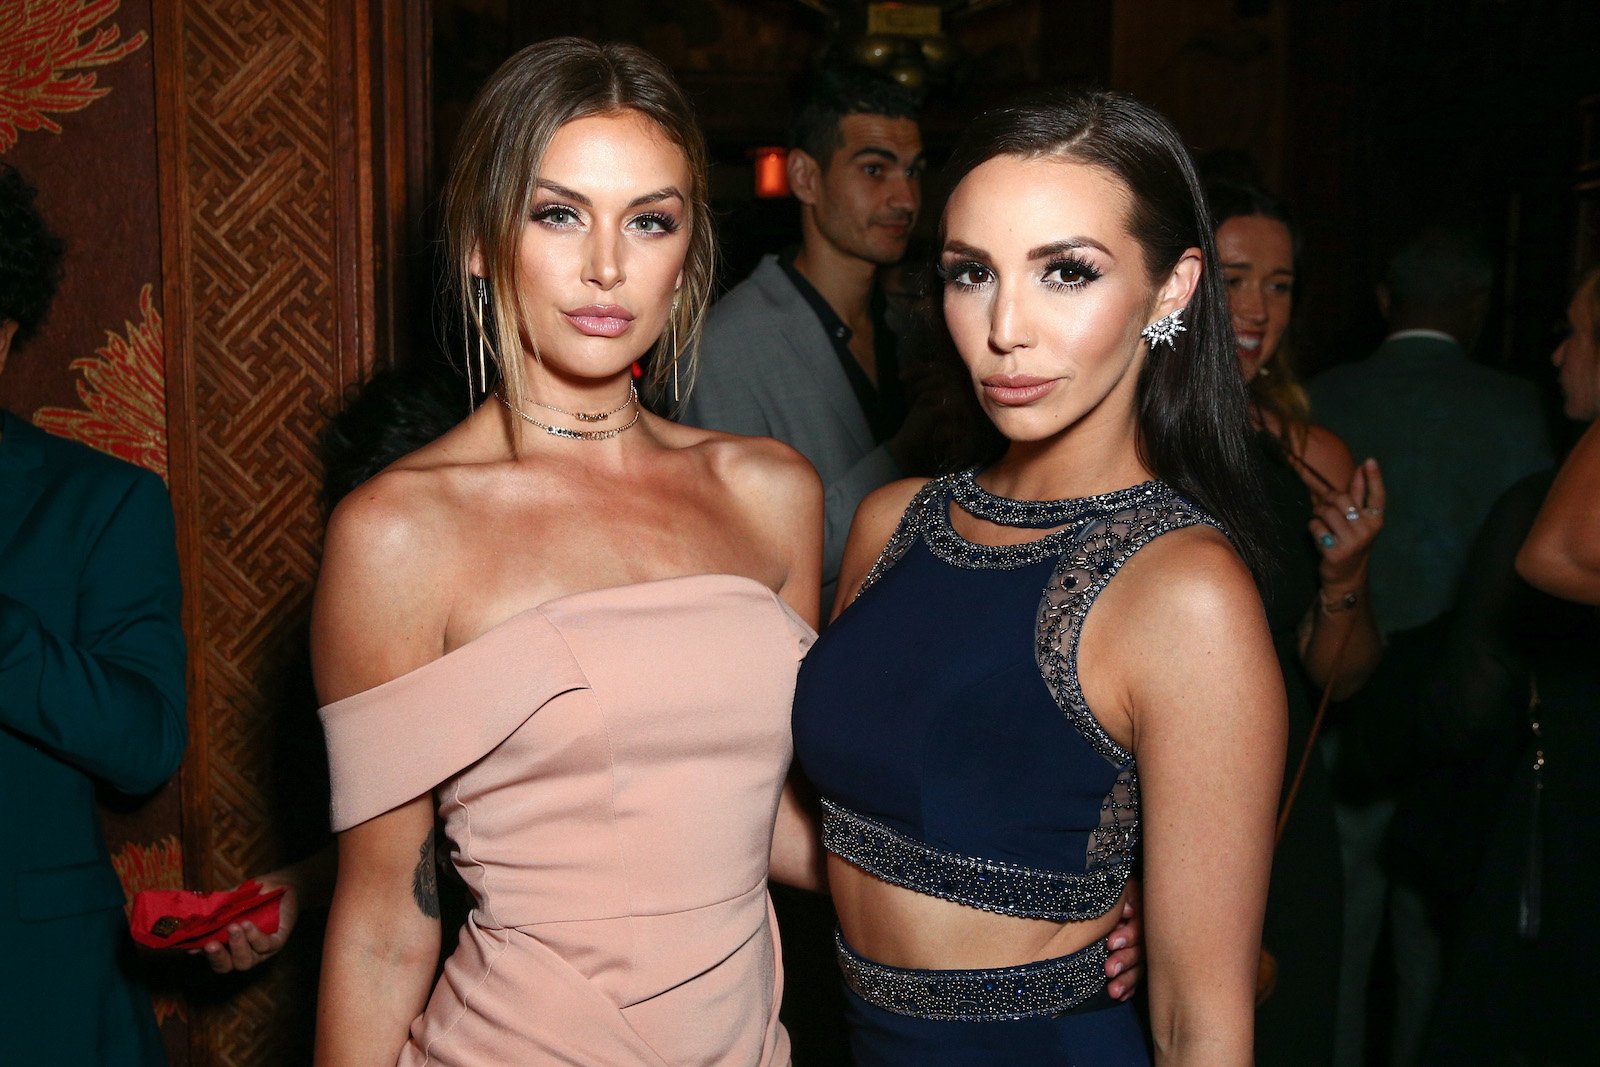 Scheana Shay from Vanderpump Rules says she is in touch with Lala Kent amid her breakup